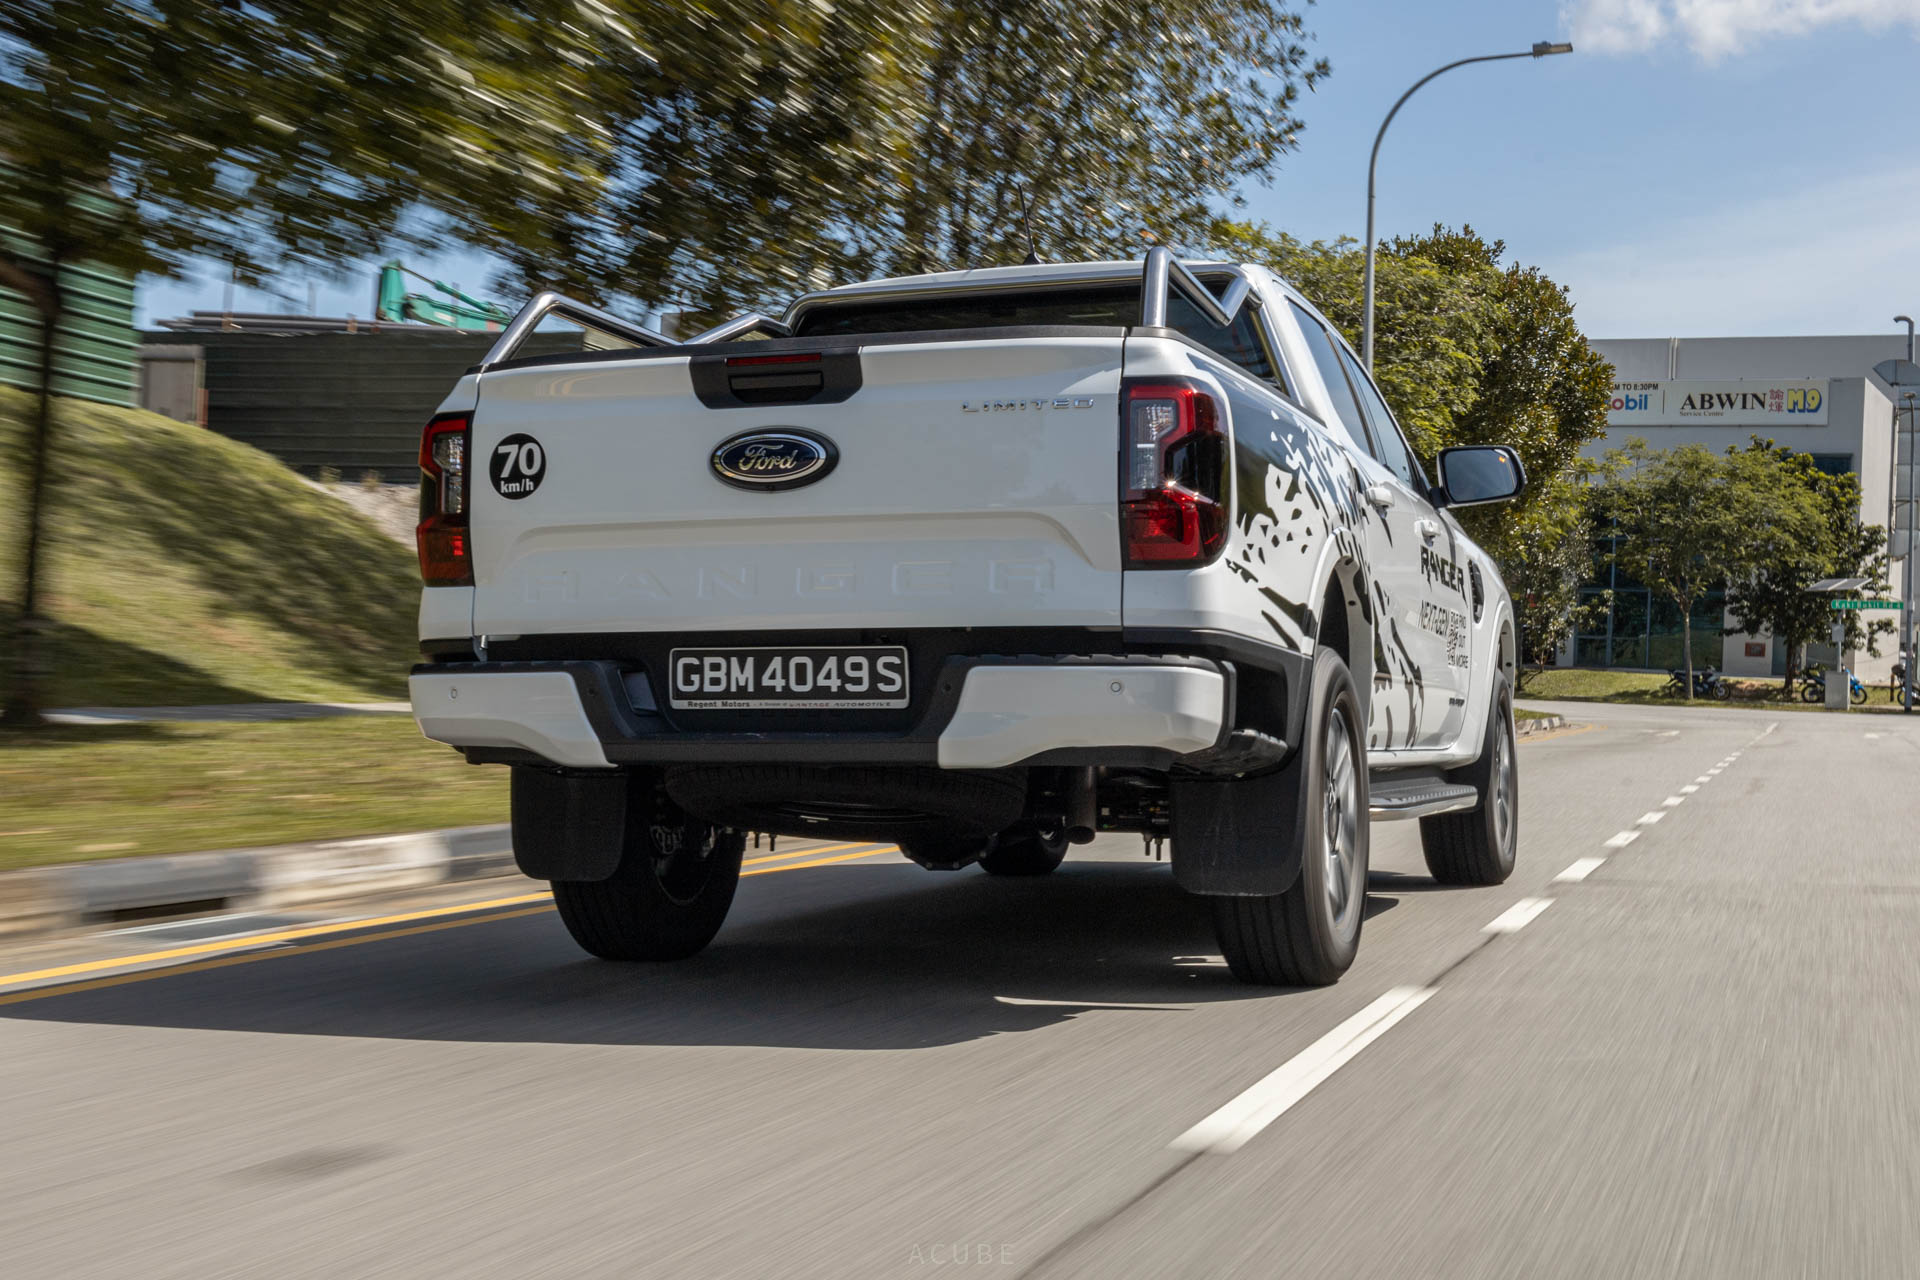 mreview: 2023 ford ranger - more than just a truck